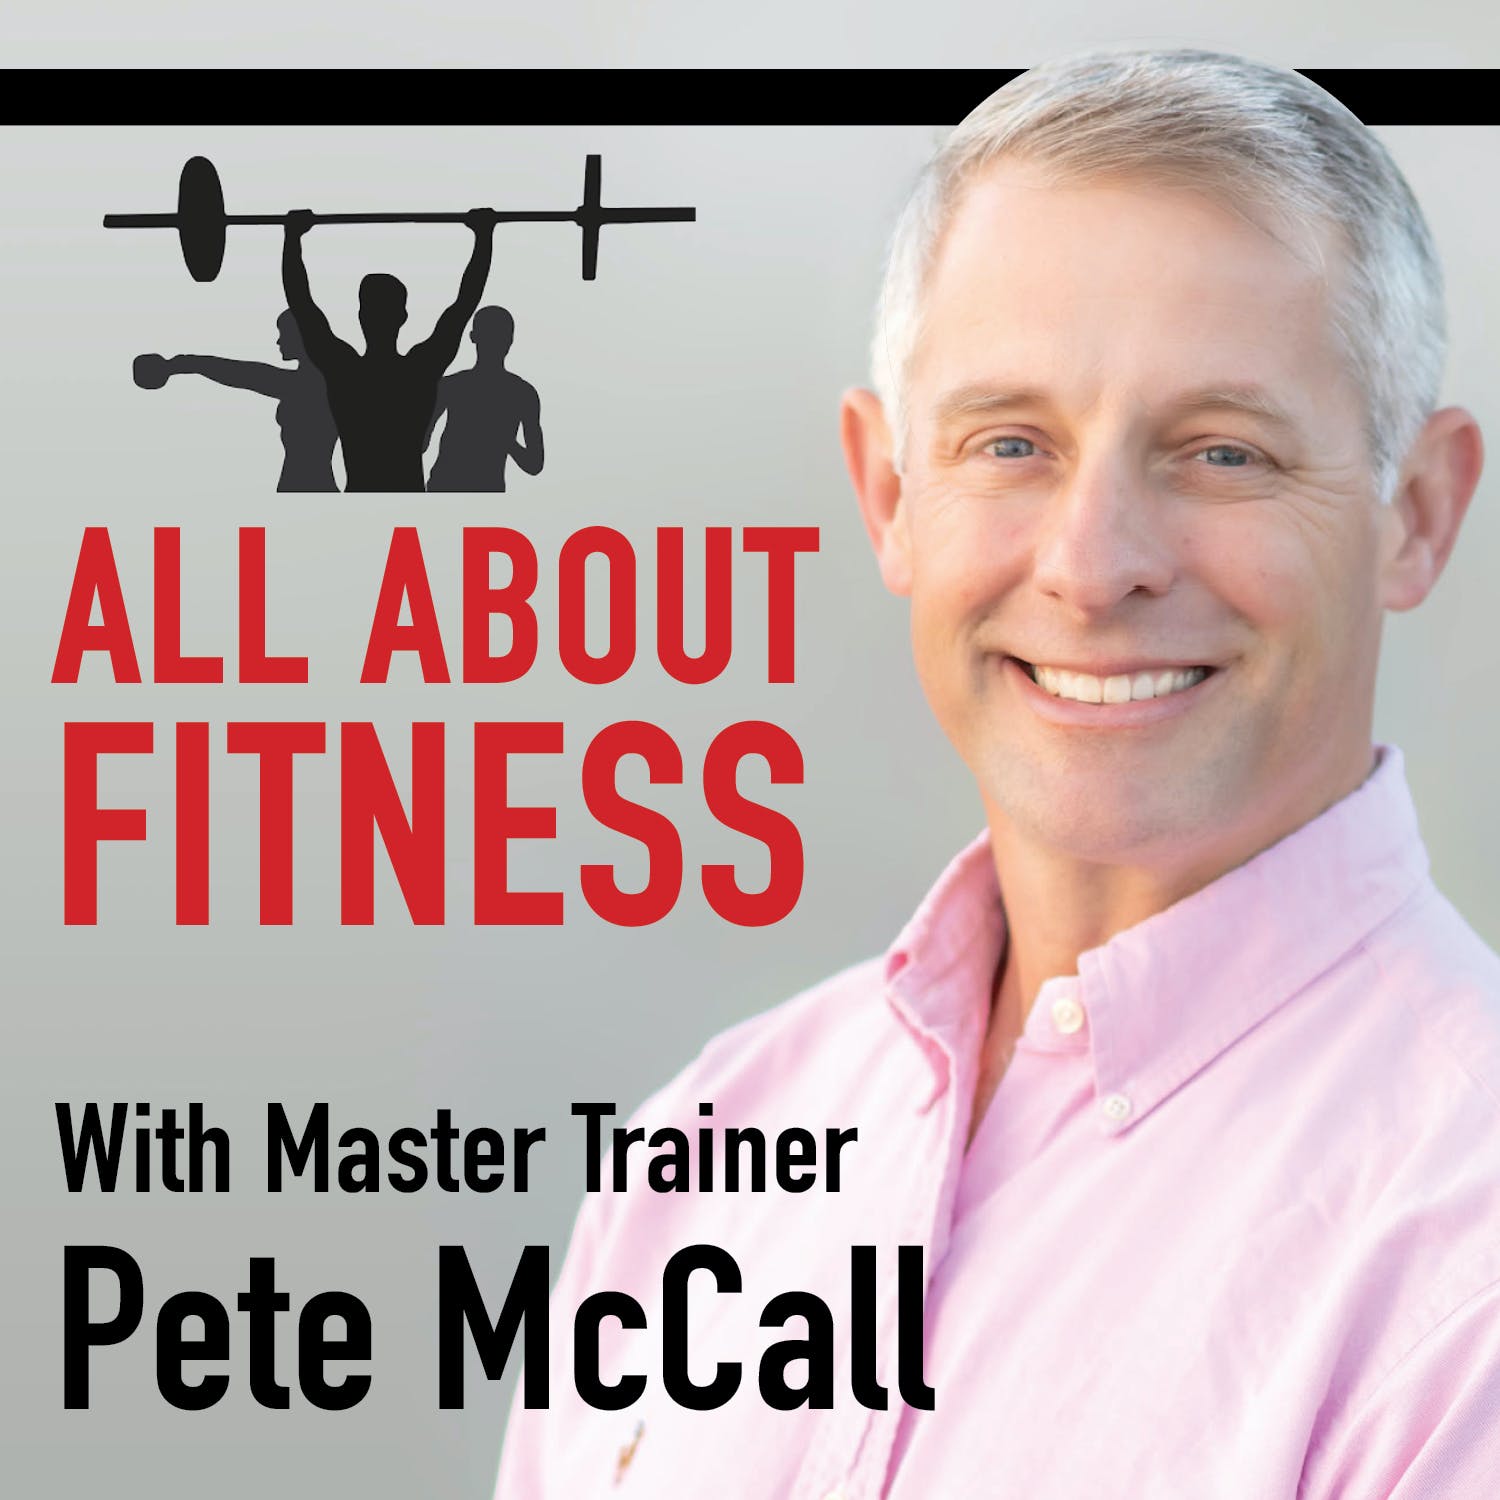 Pete McCall & Dr. Jim Stray-Gundersen Podcast - The Benefits of Blood Flow Restriction for Muscle Growth